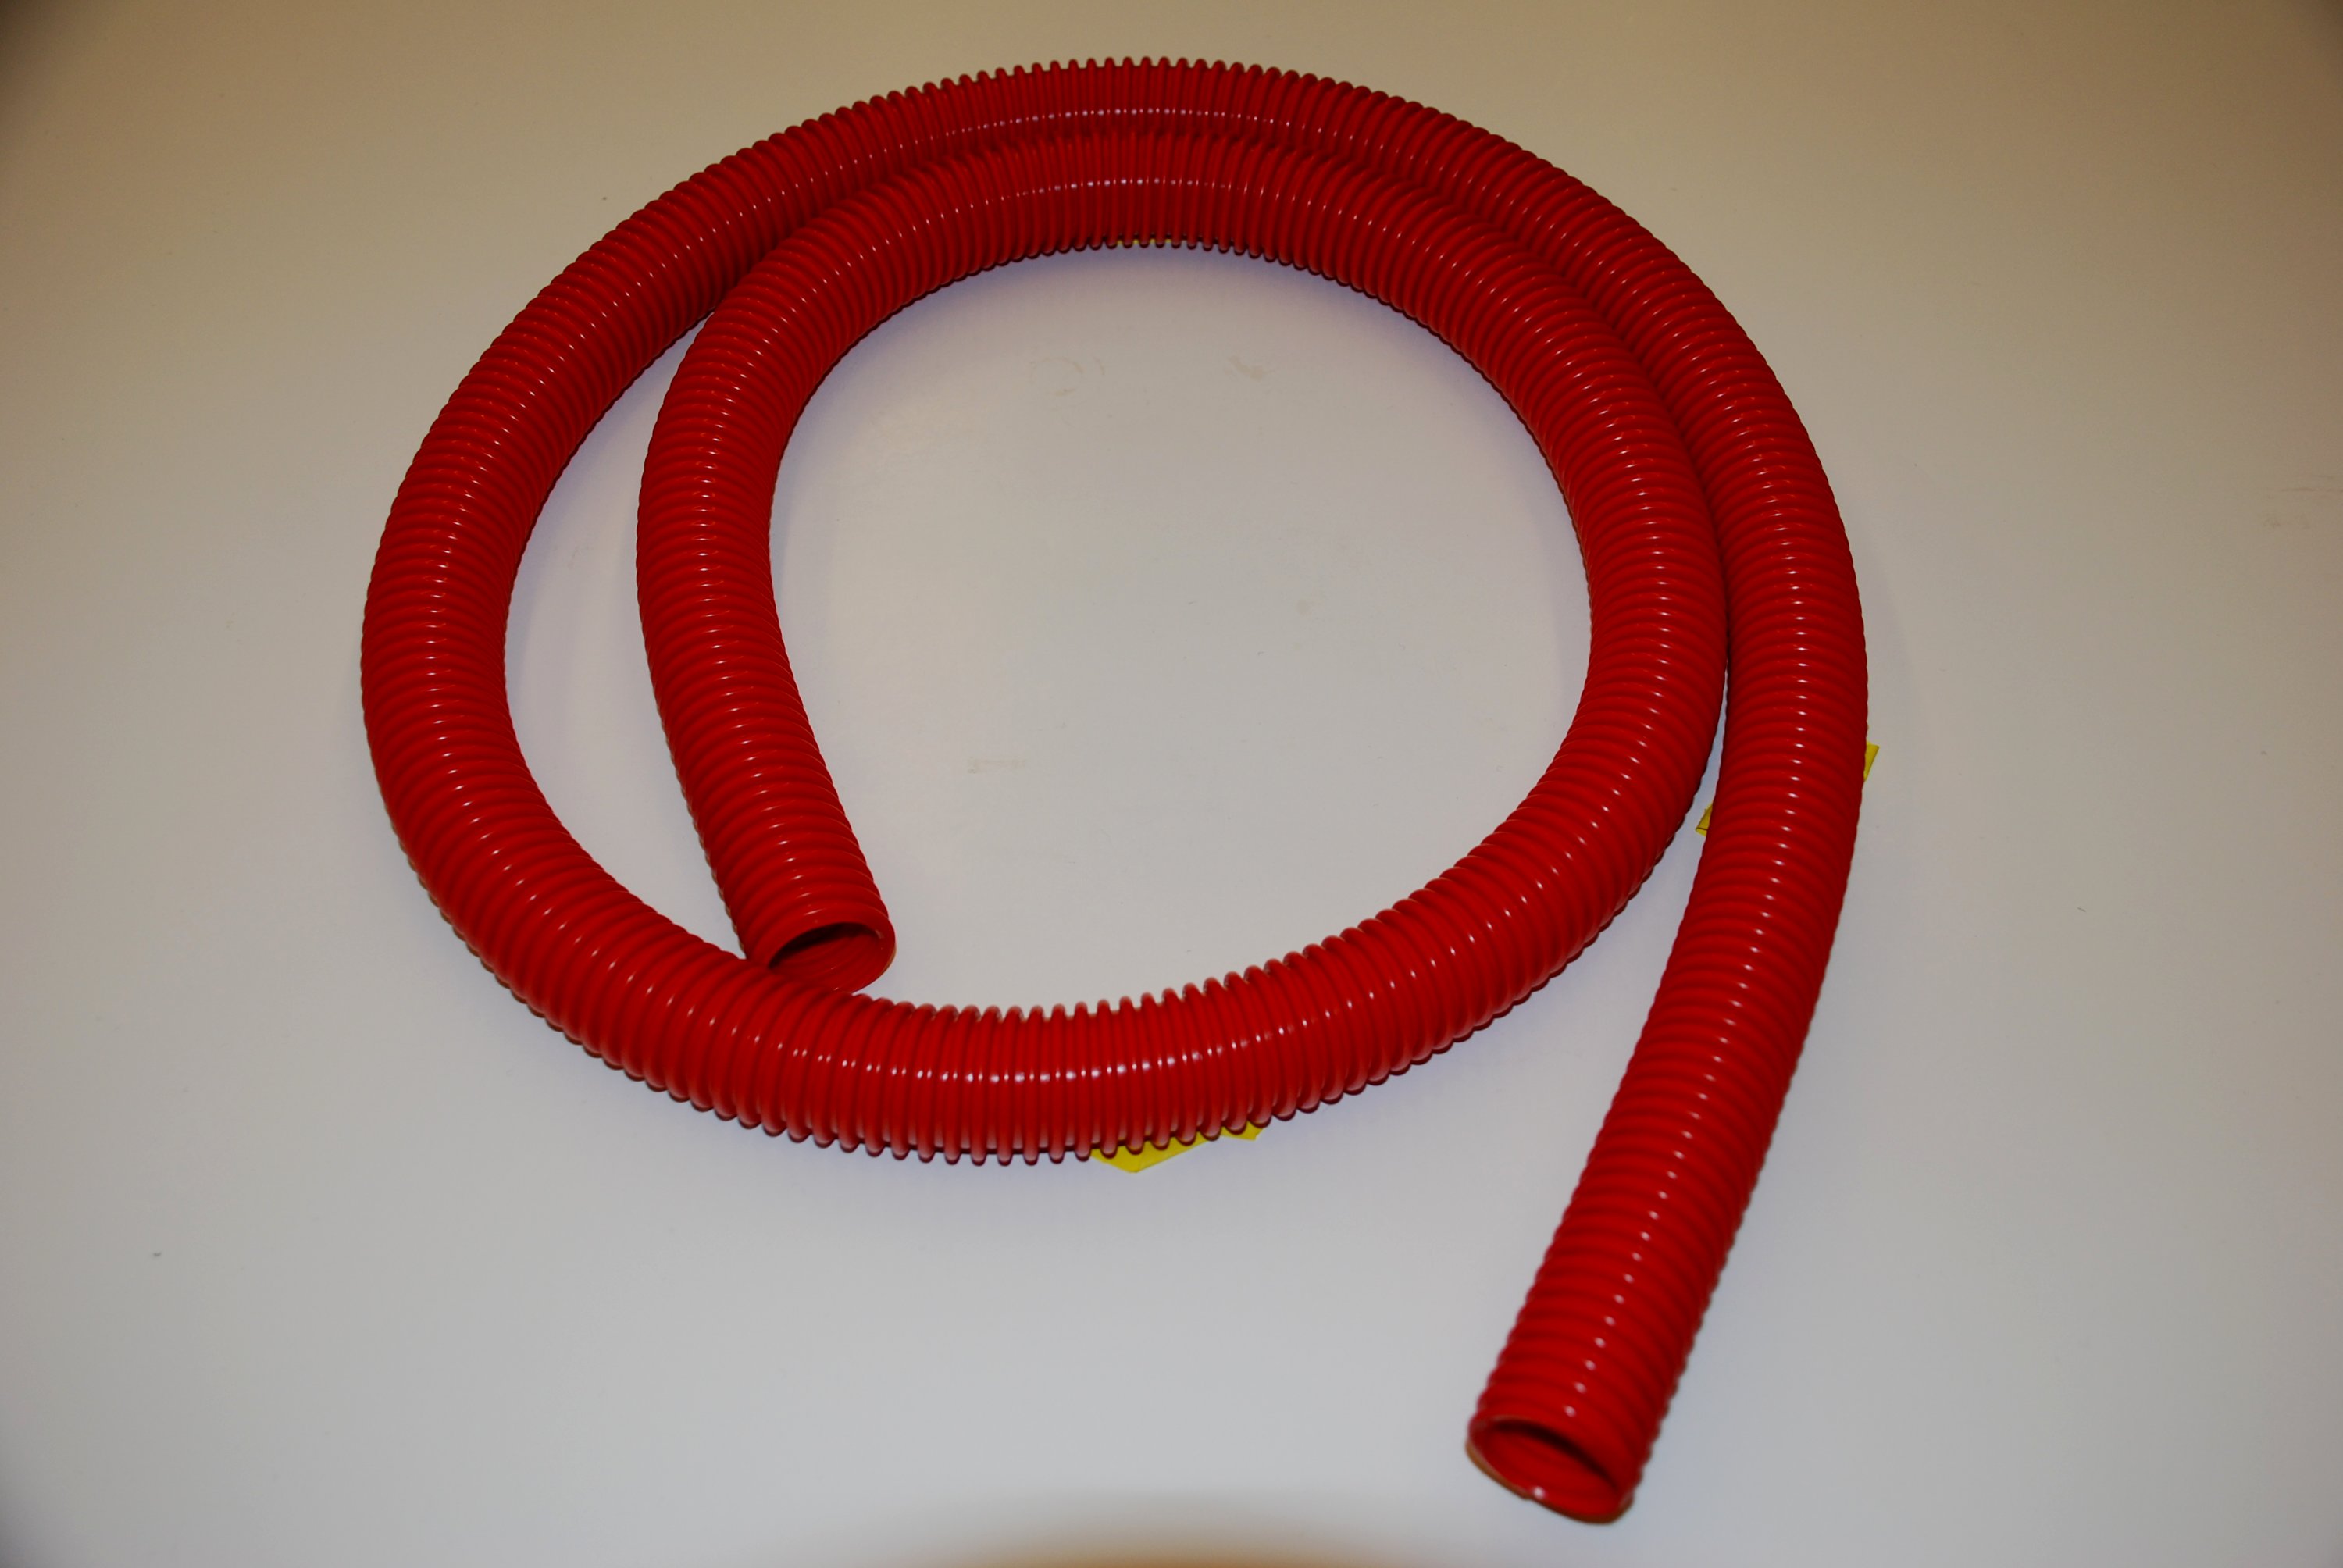 3M™ Vacuum Hose Anti-Static 28730 is made of conductive materials that reduce the risk of static discharge. This results in fewer sparks, promoting operator comfort and improved safety